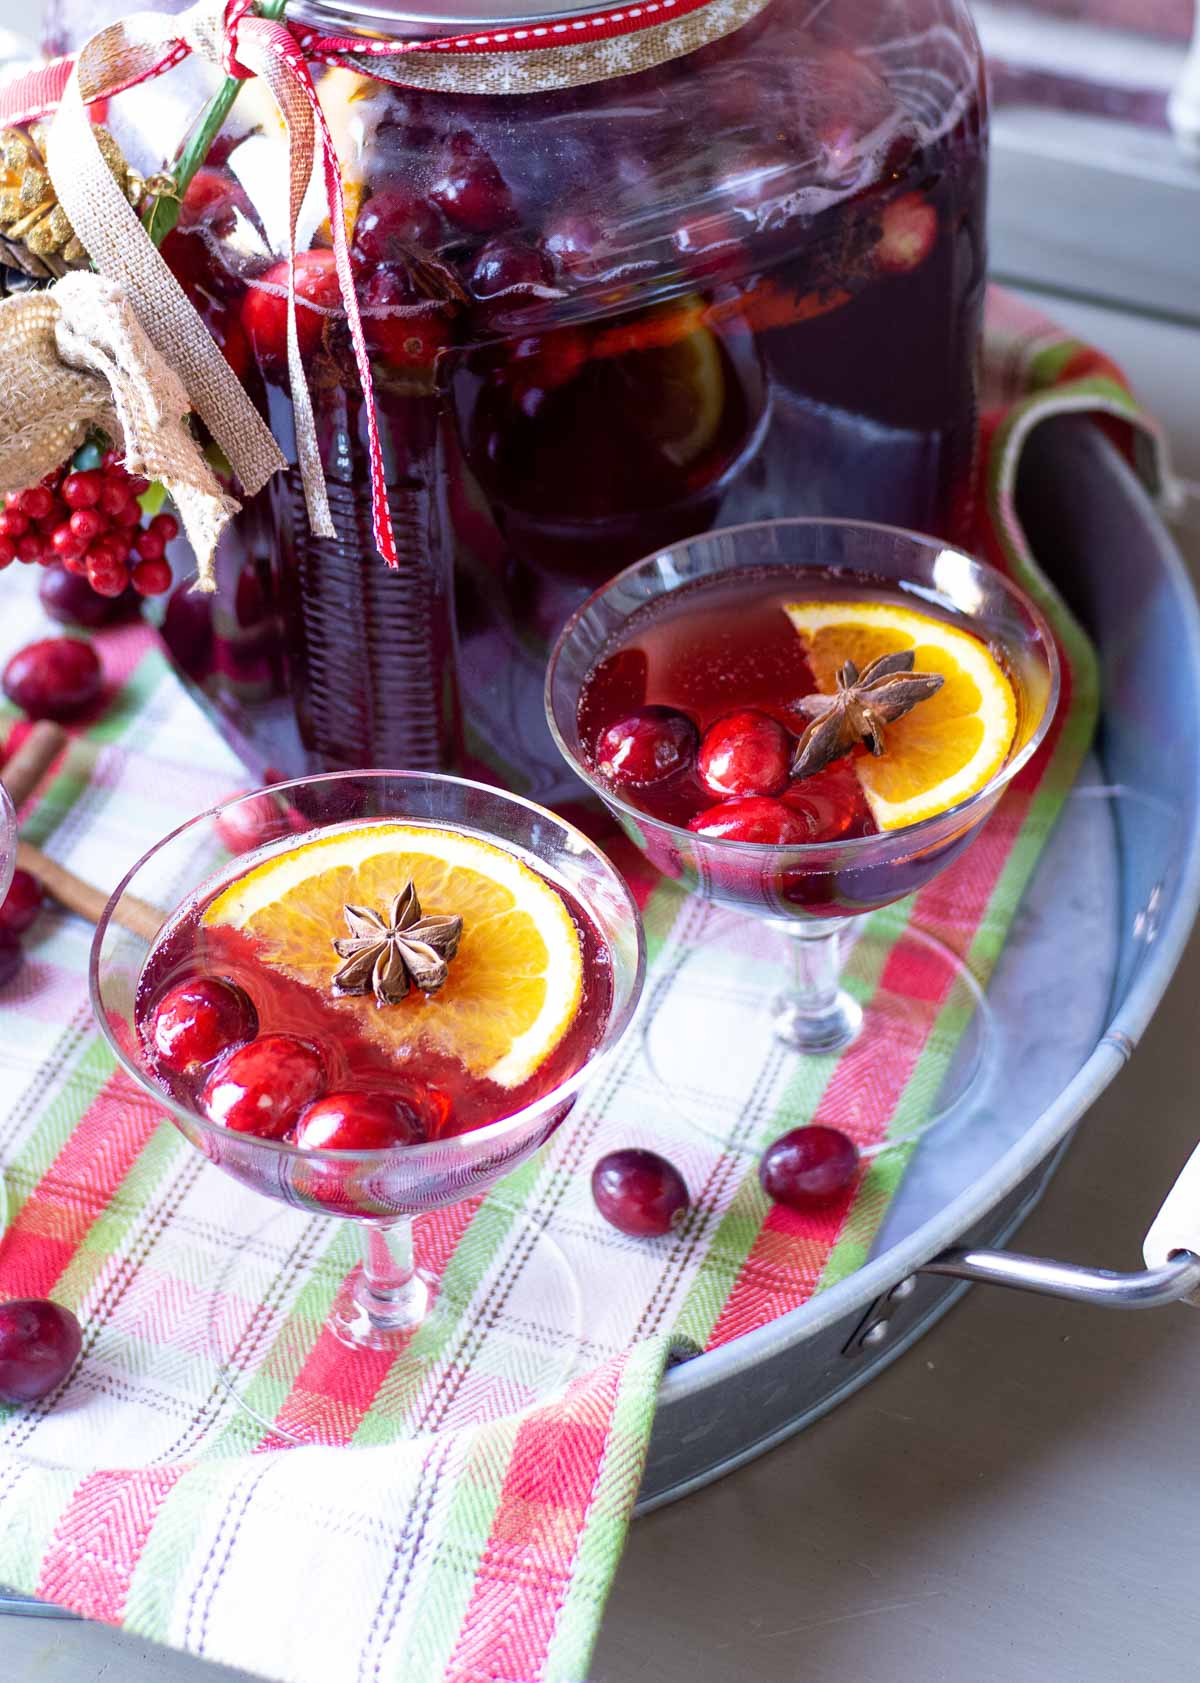 Garnish a cranberry cocktail with fresh cranberries, star anise and orange slices